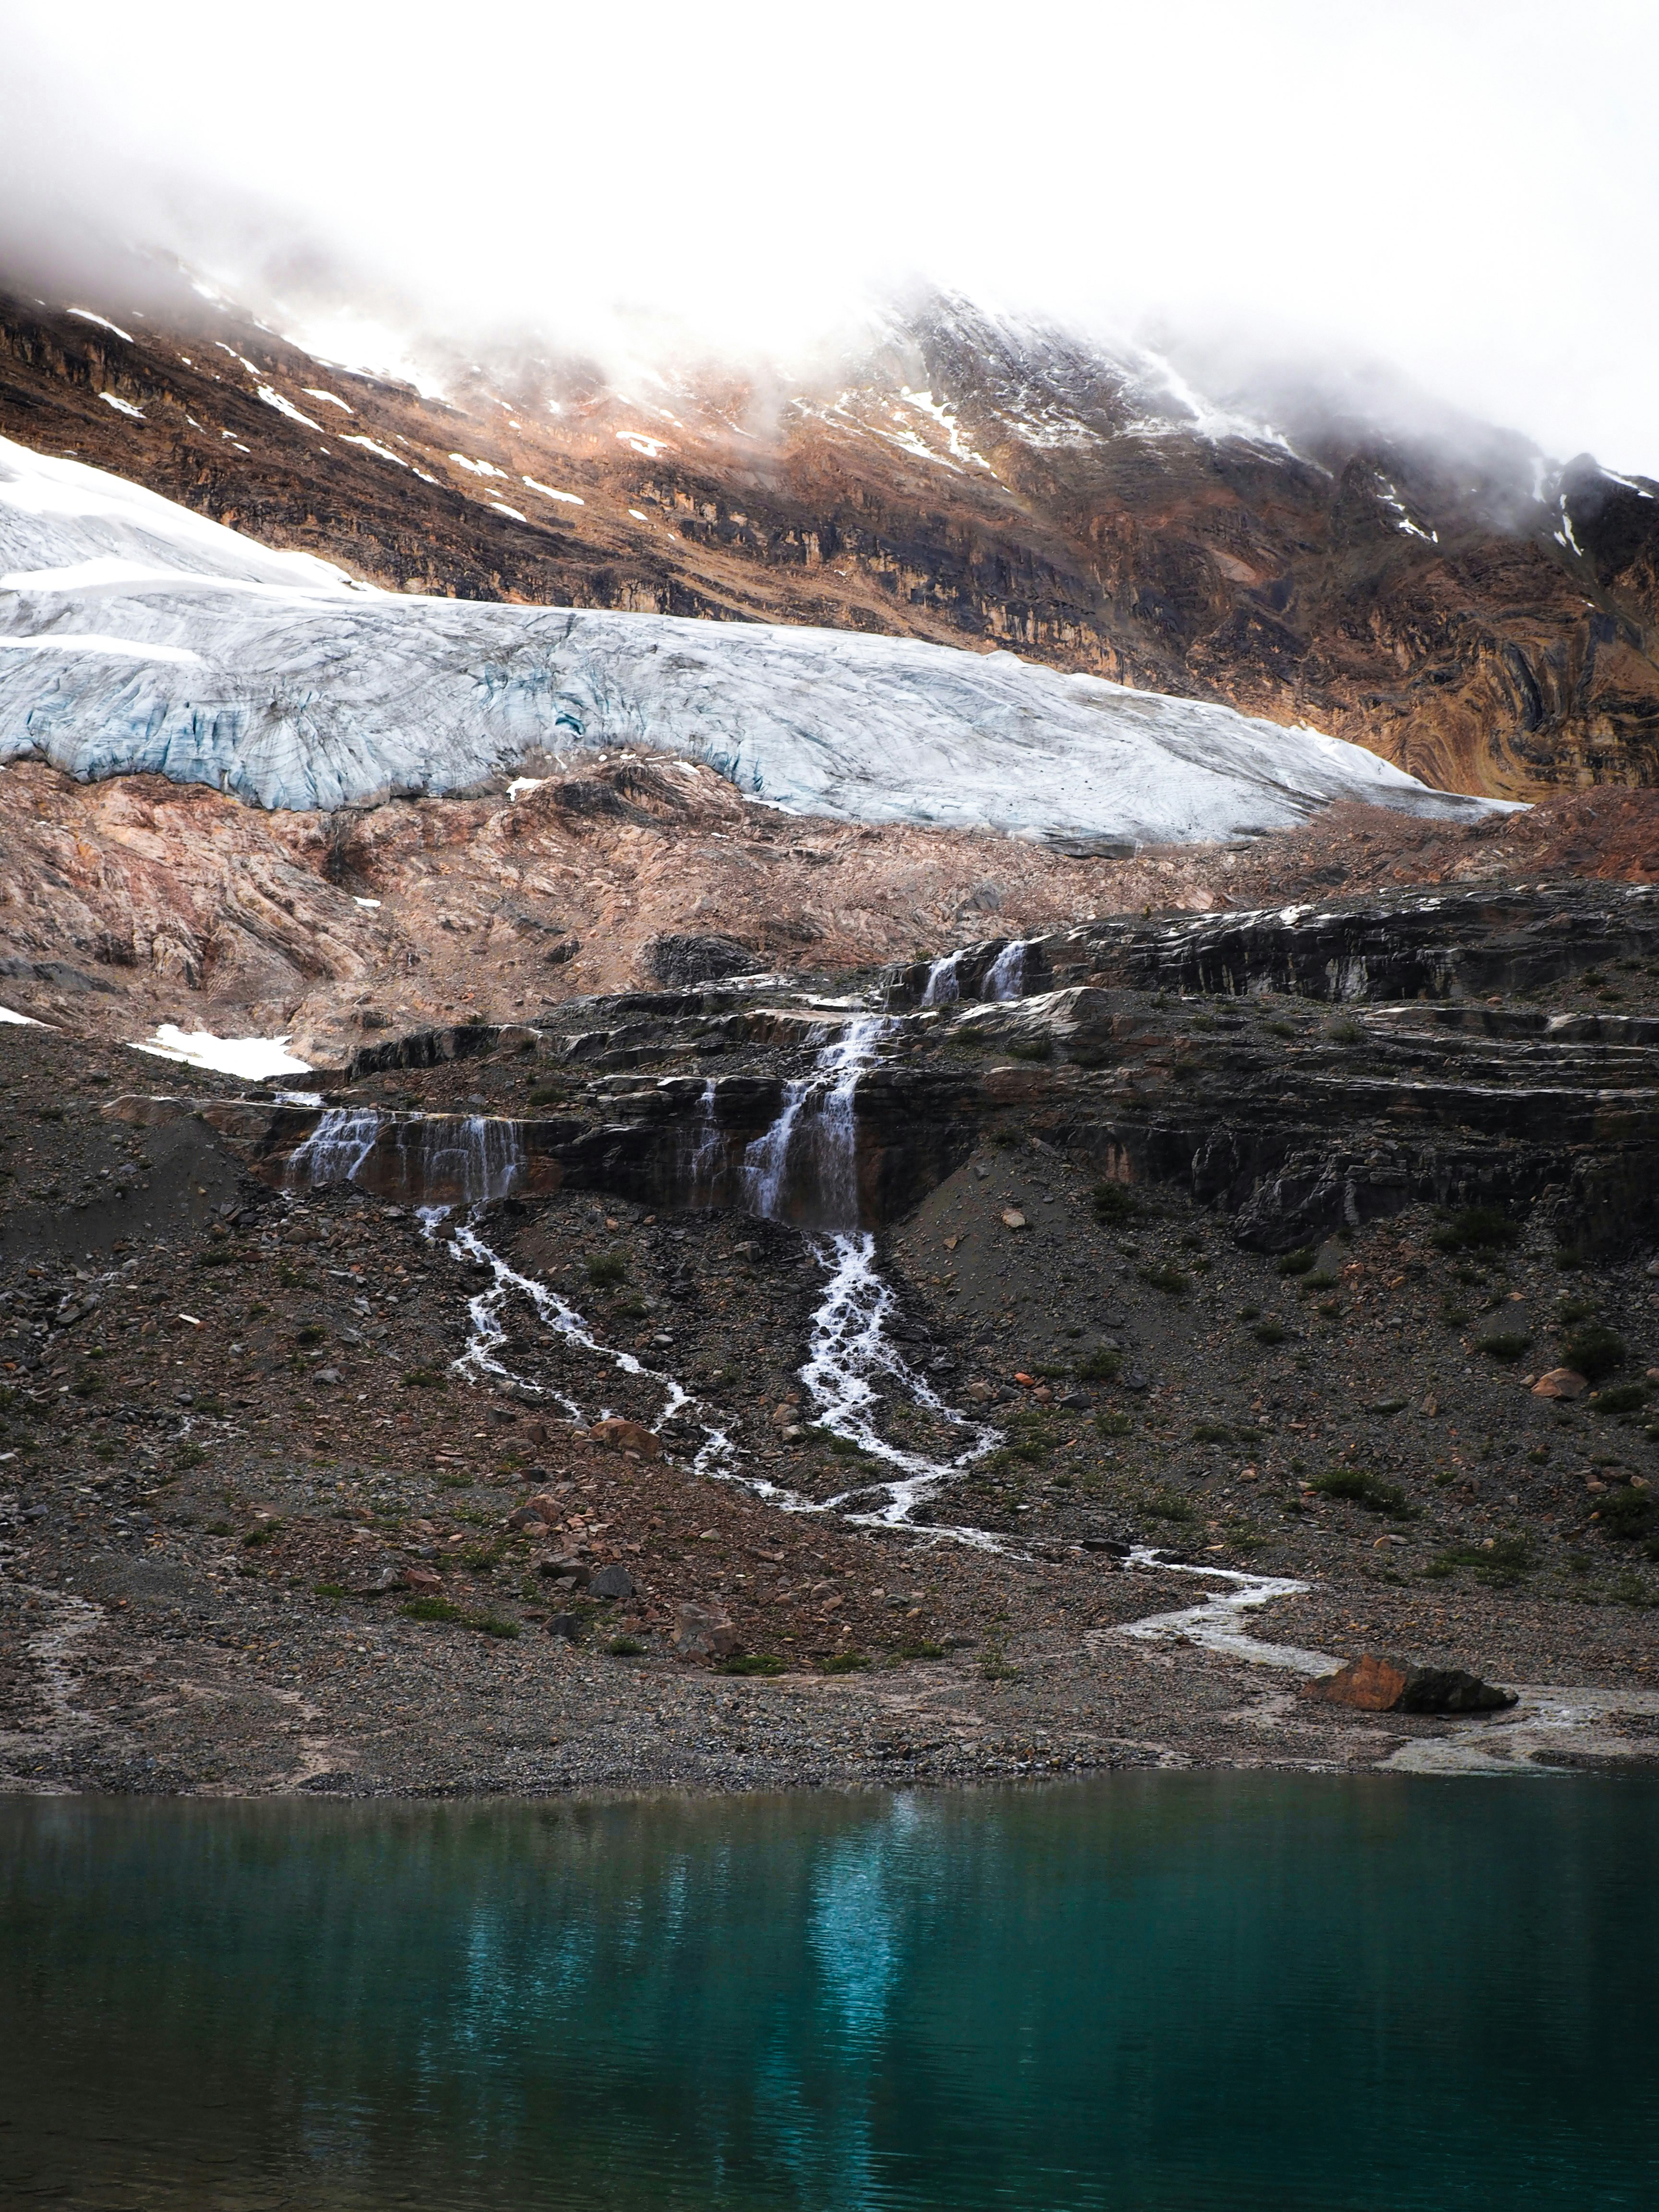 A glacial stream pouring into a small tarn in Yoho, Alberta, Canada. Cut through by the Iceline Trail, this area was entirely covered by a glacier not 100 years ago – a personal look into the new landscapes carved by climate change. 